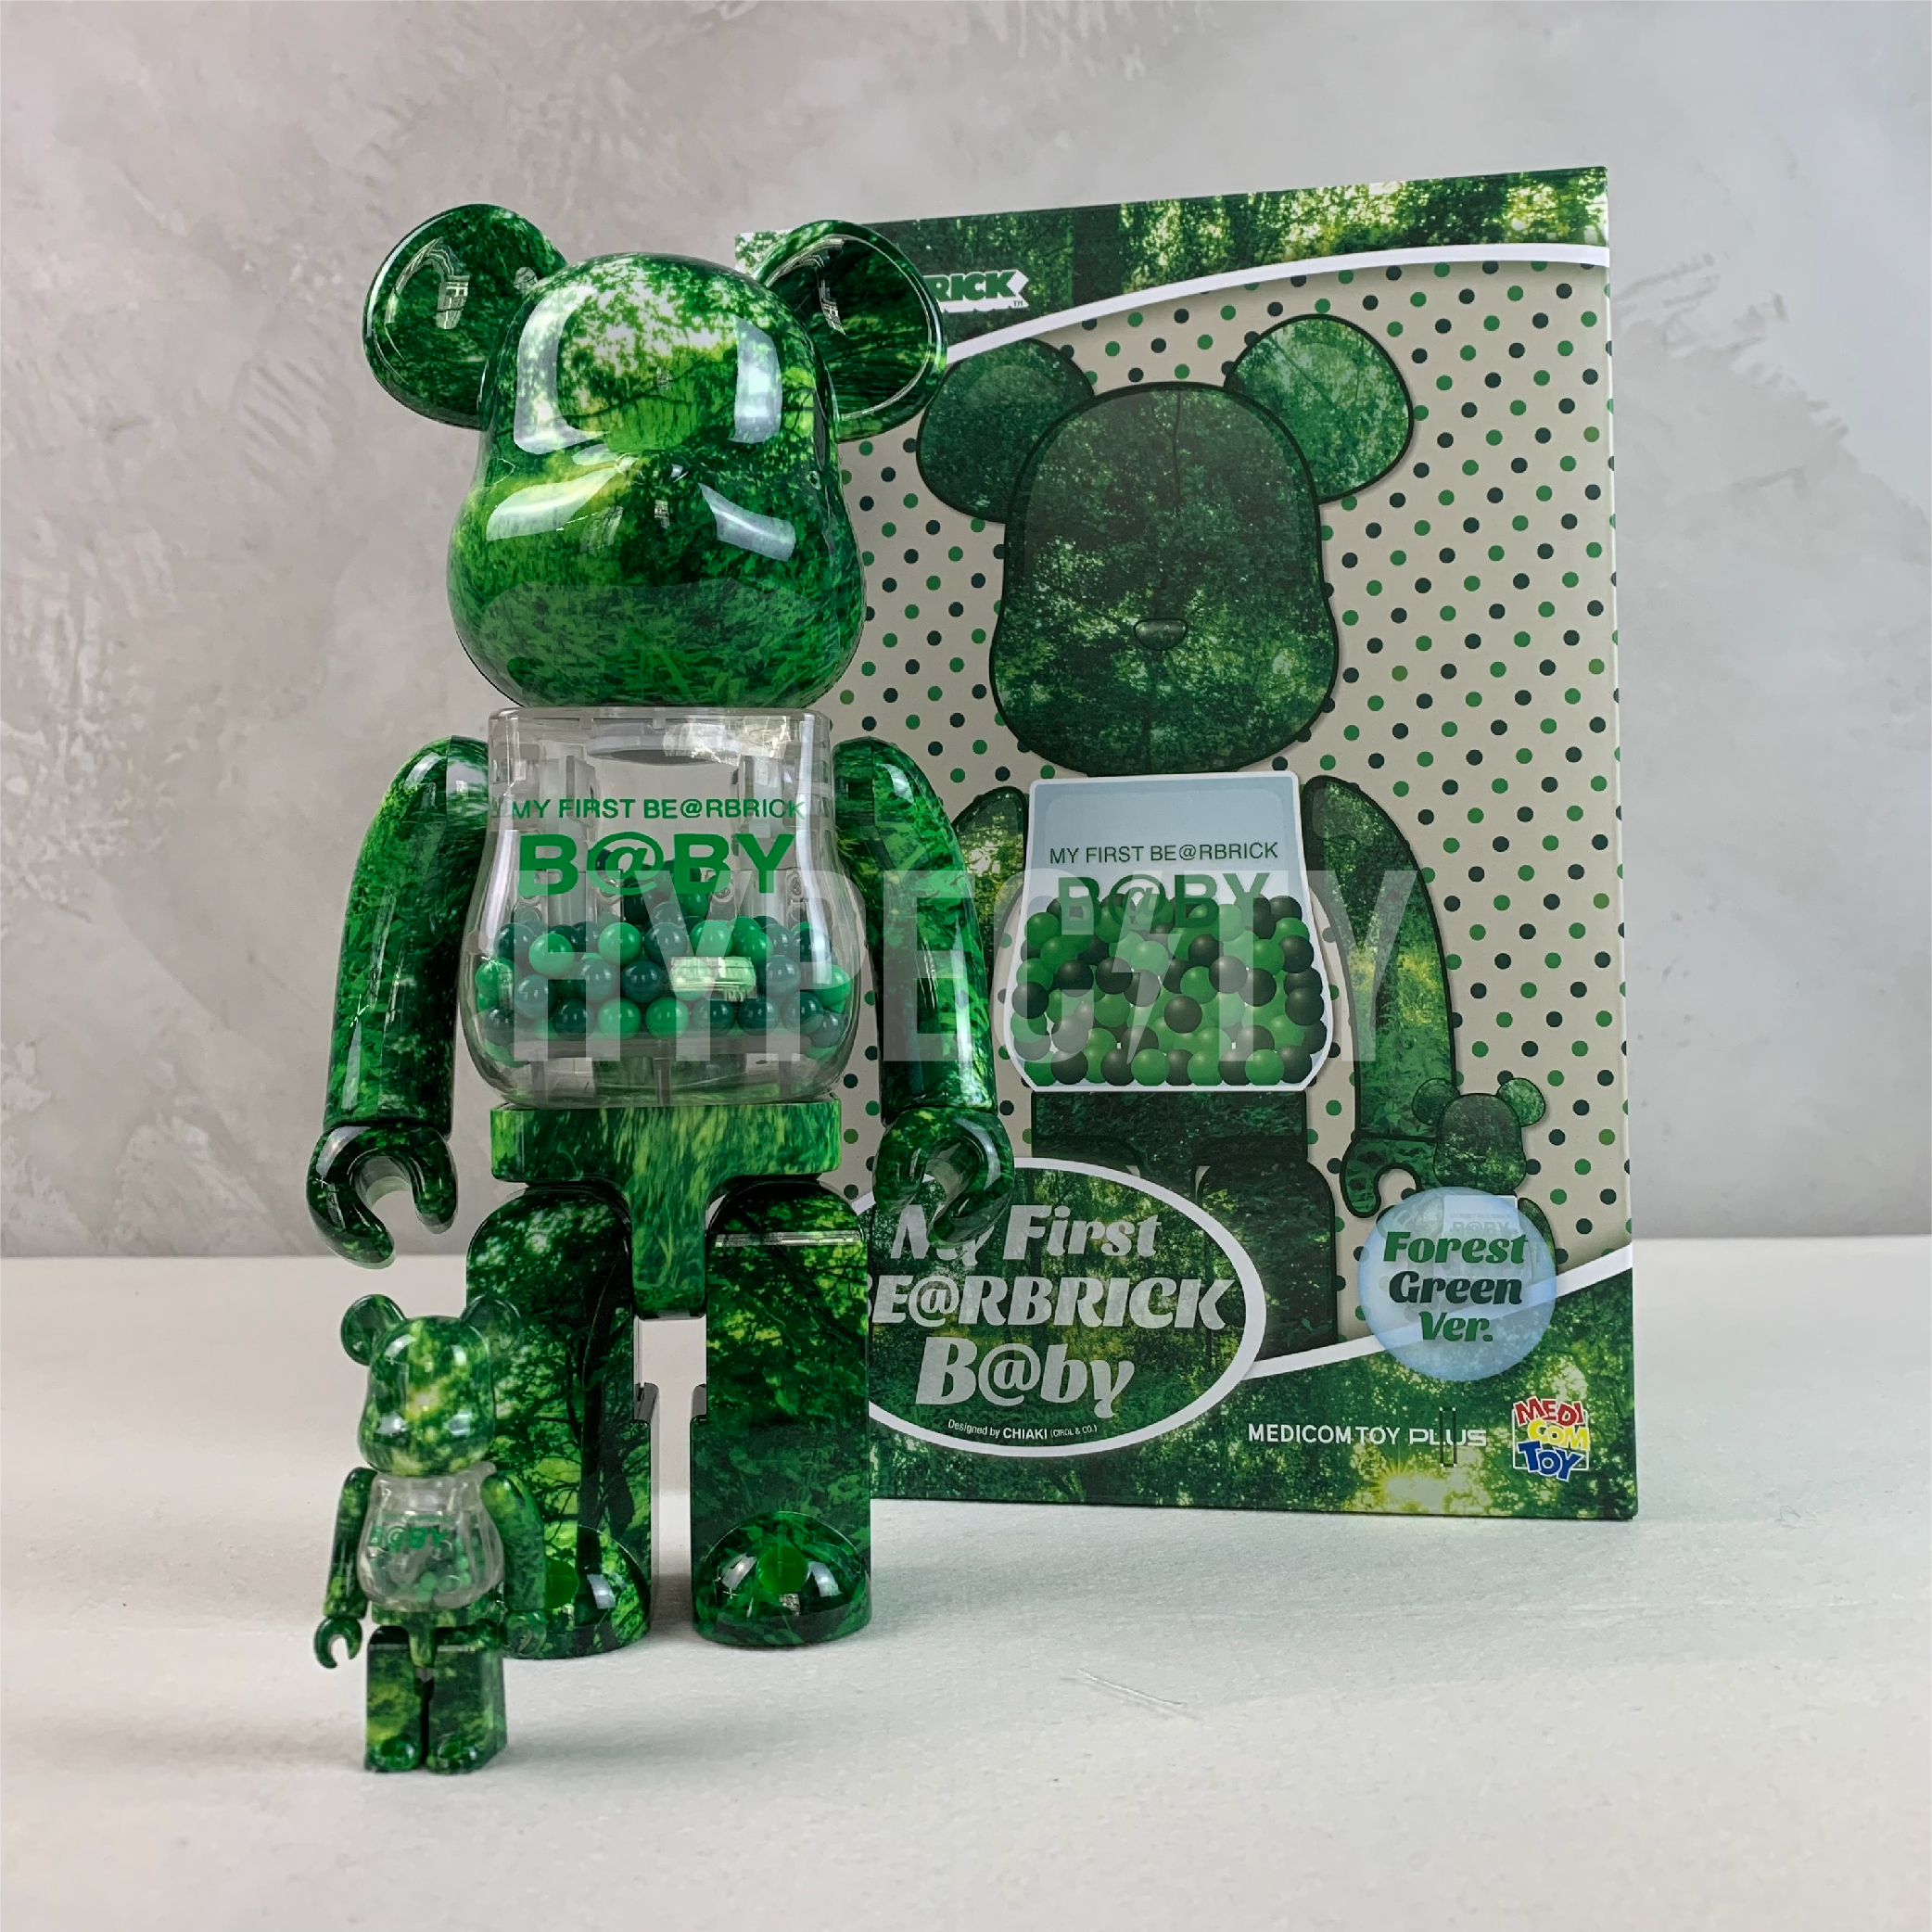 MY FIRST BE@RBRICK B@BY FOREST GREEN 400